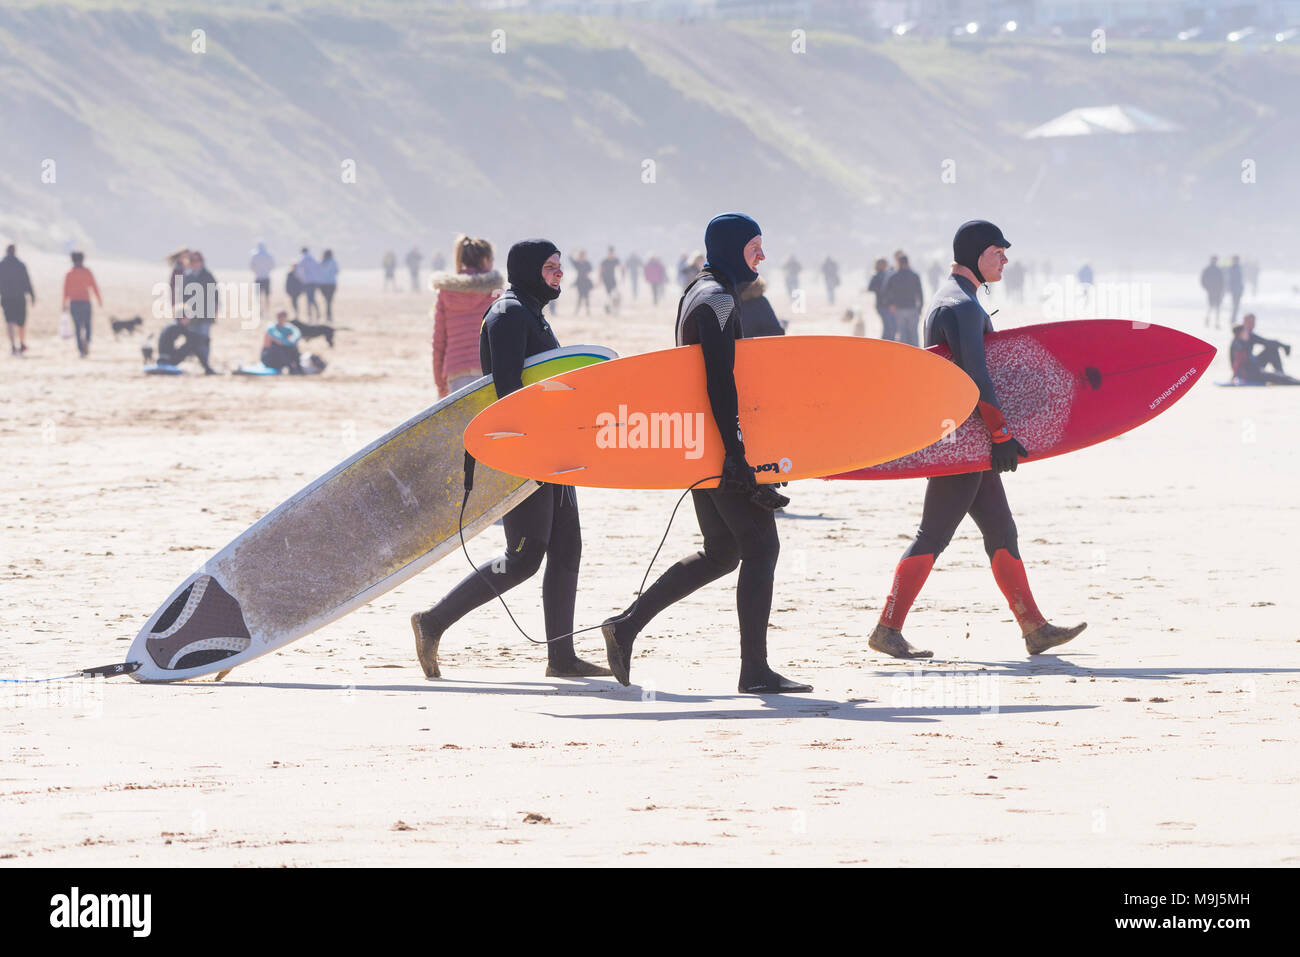 UK surfing - surfers carrying their surboards across Fistral beach in Newquay Cornwall. Stock Photo